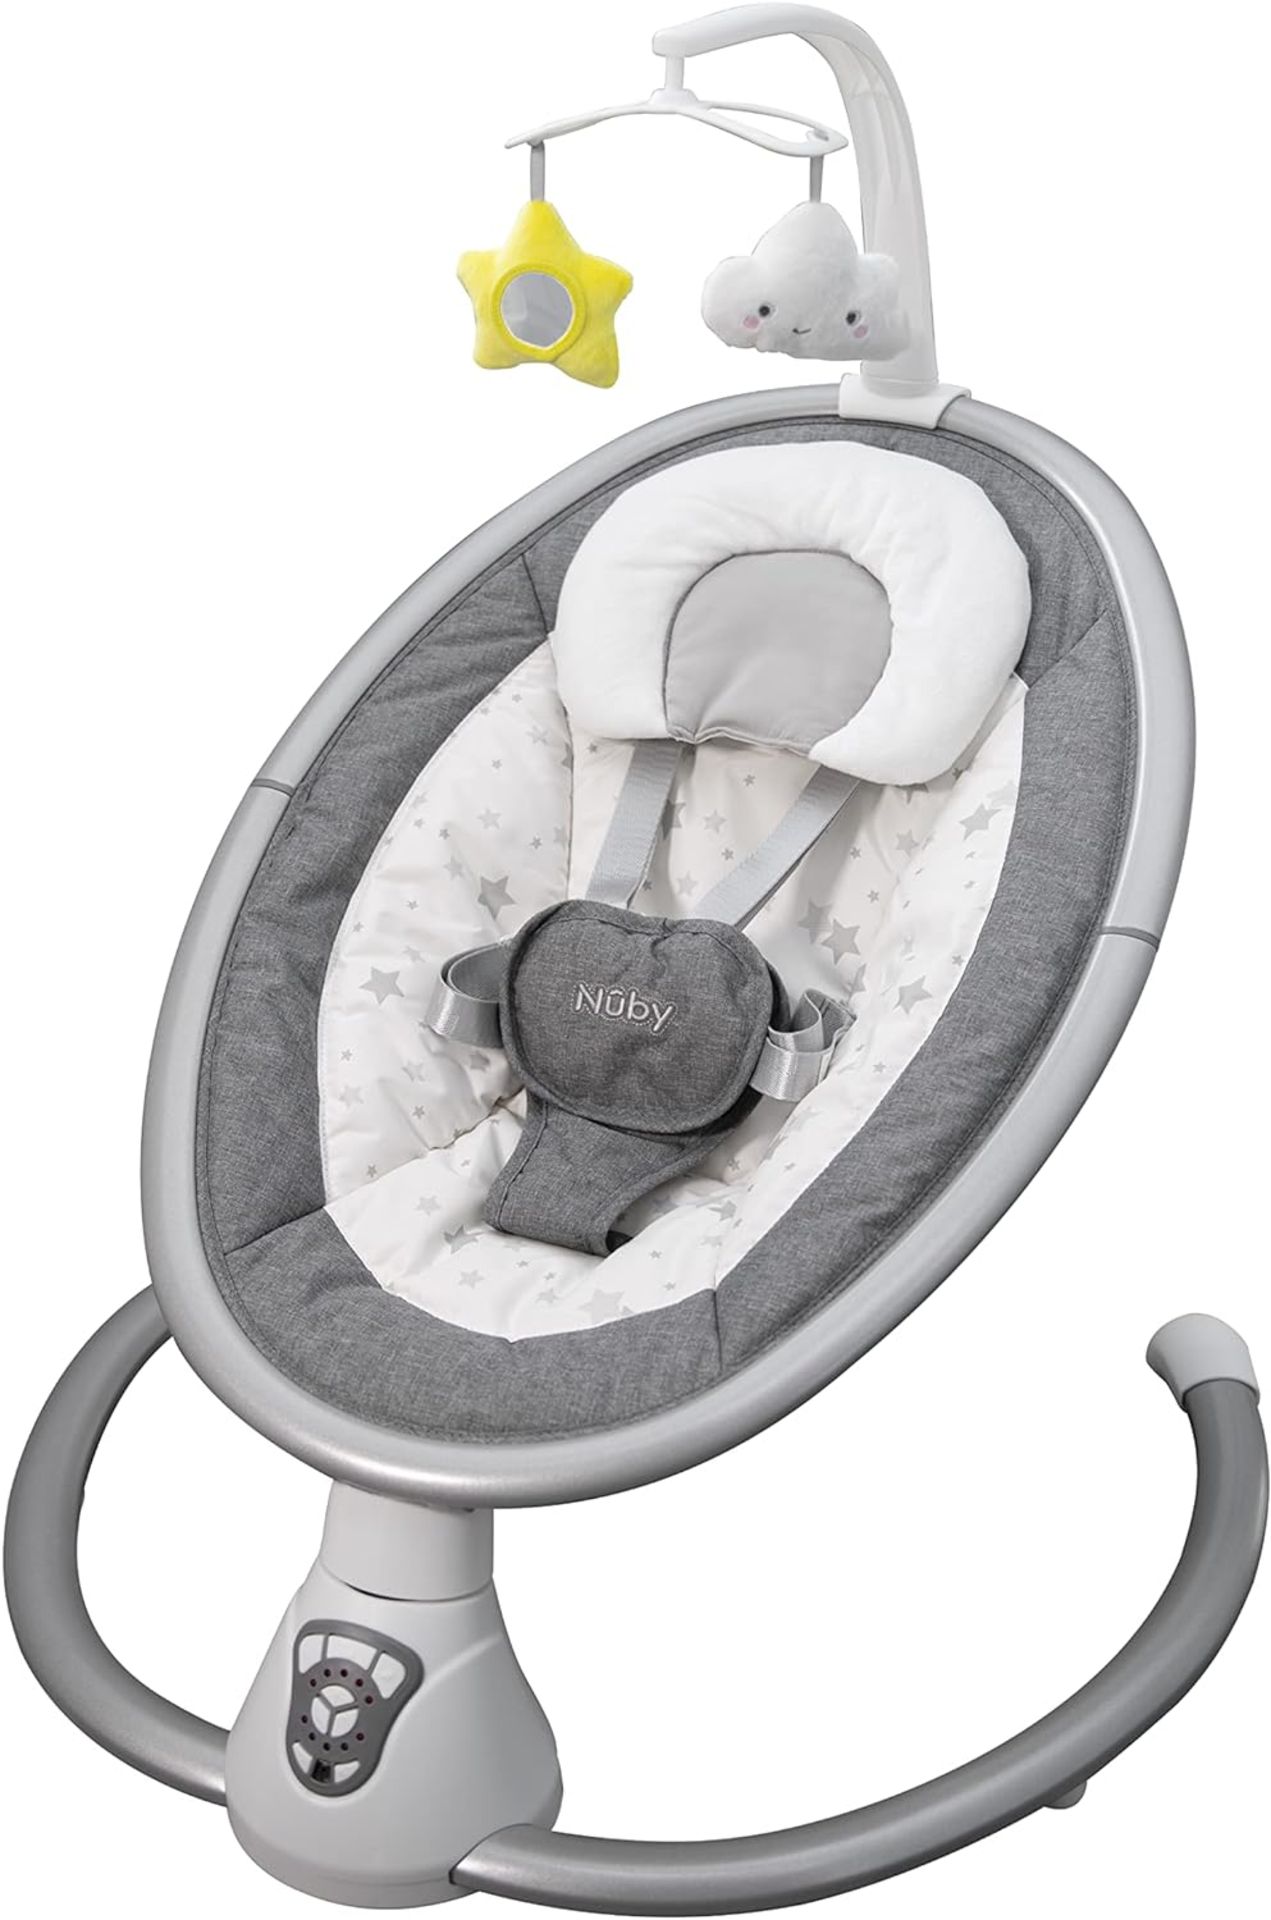 NUBY BABY MOTORIZED SWING FOR BABIES WITH MUSICAL BLUETOOTH CONNECTION RRP £149 R11-8